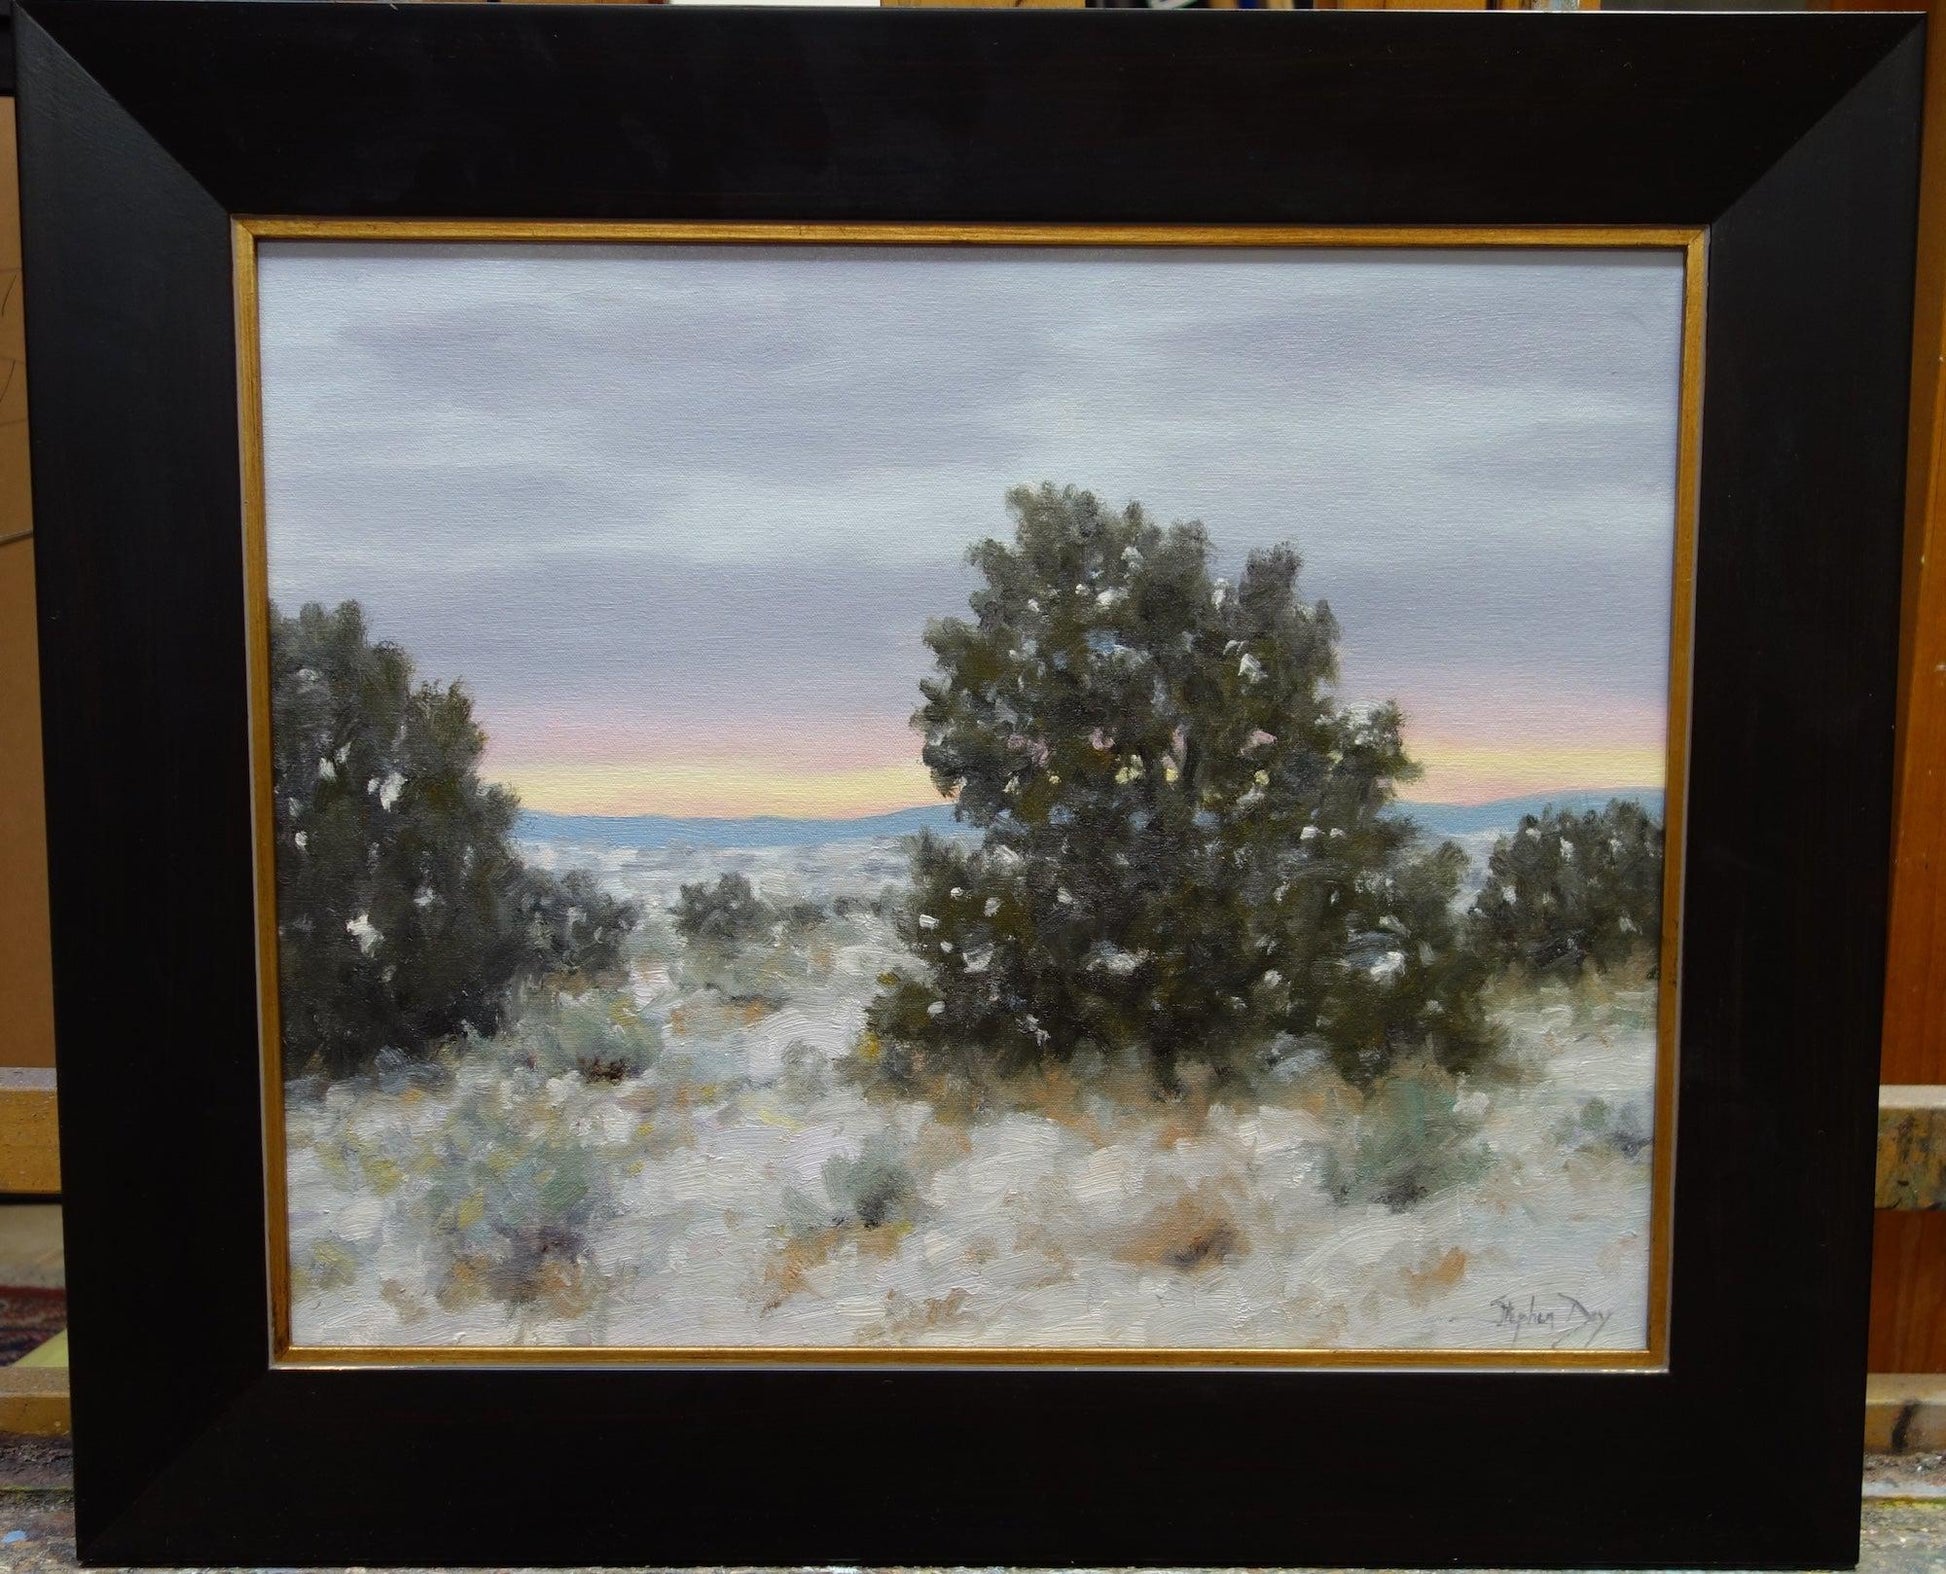 In the Quiet Winter-Painting-Stephen Day-Sorrel Sky Gallery